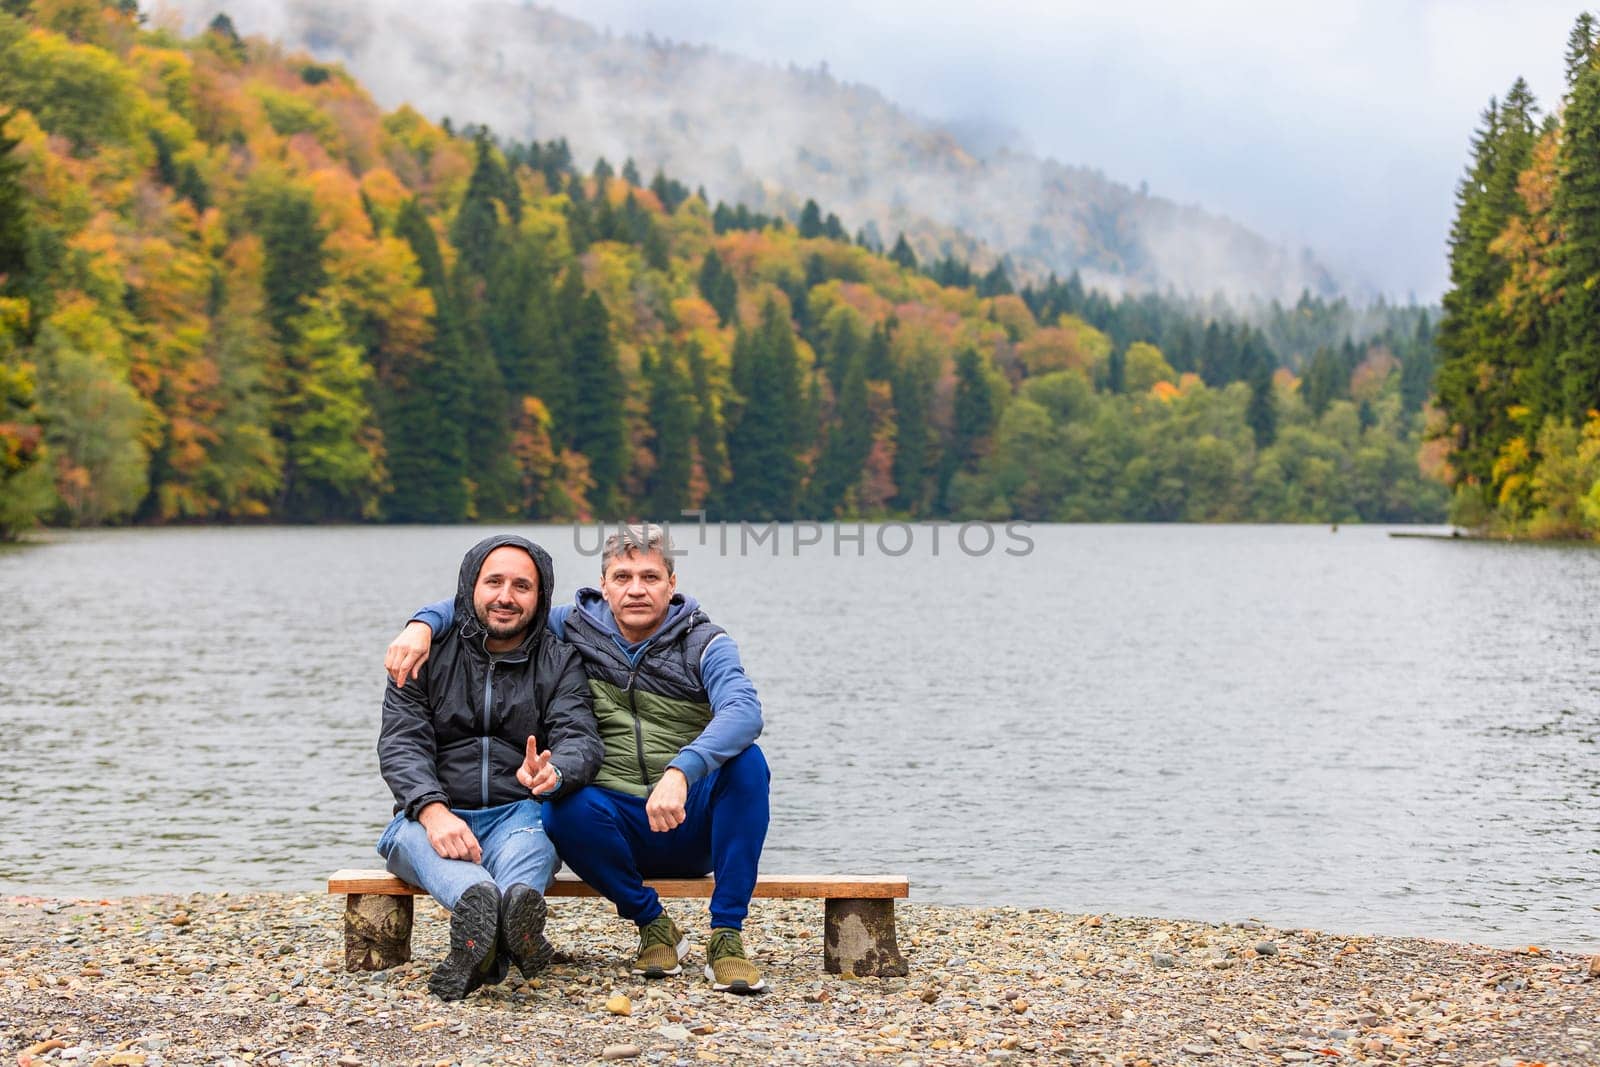 The autumn landscape of a lake in the mountains becomes a place of retreat for two men enjoying the beautiful view and tranquility of nature.